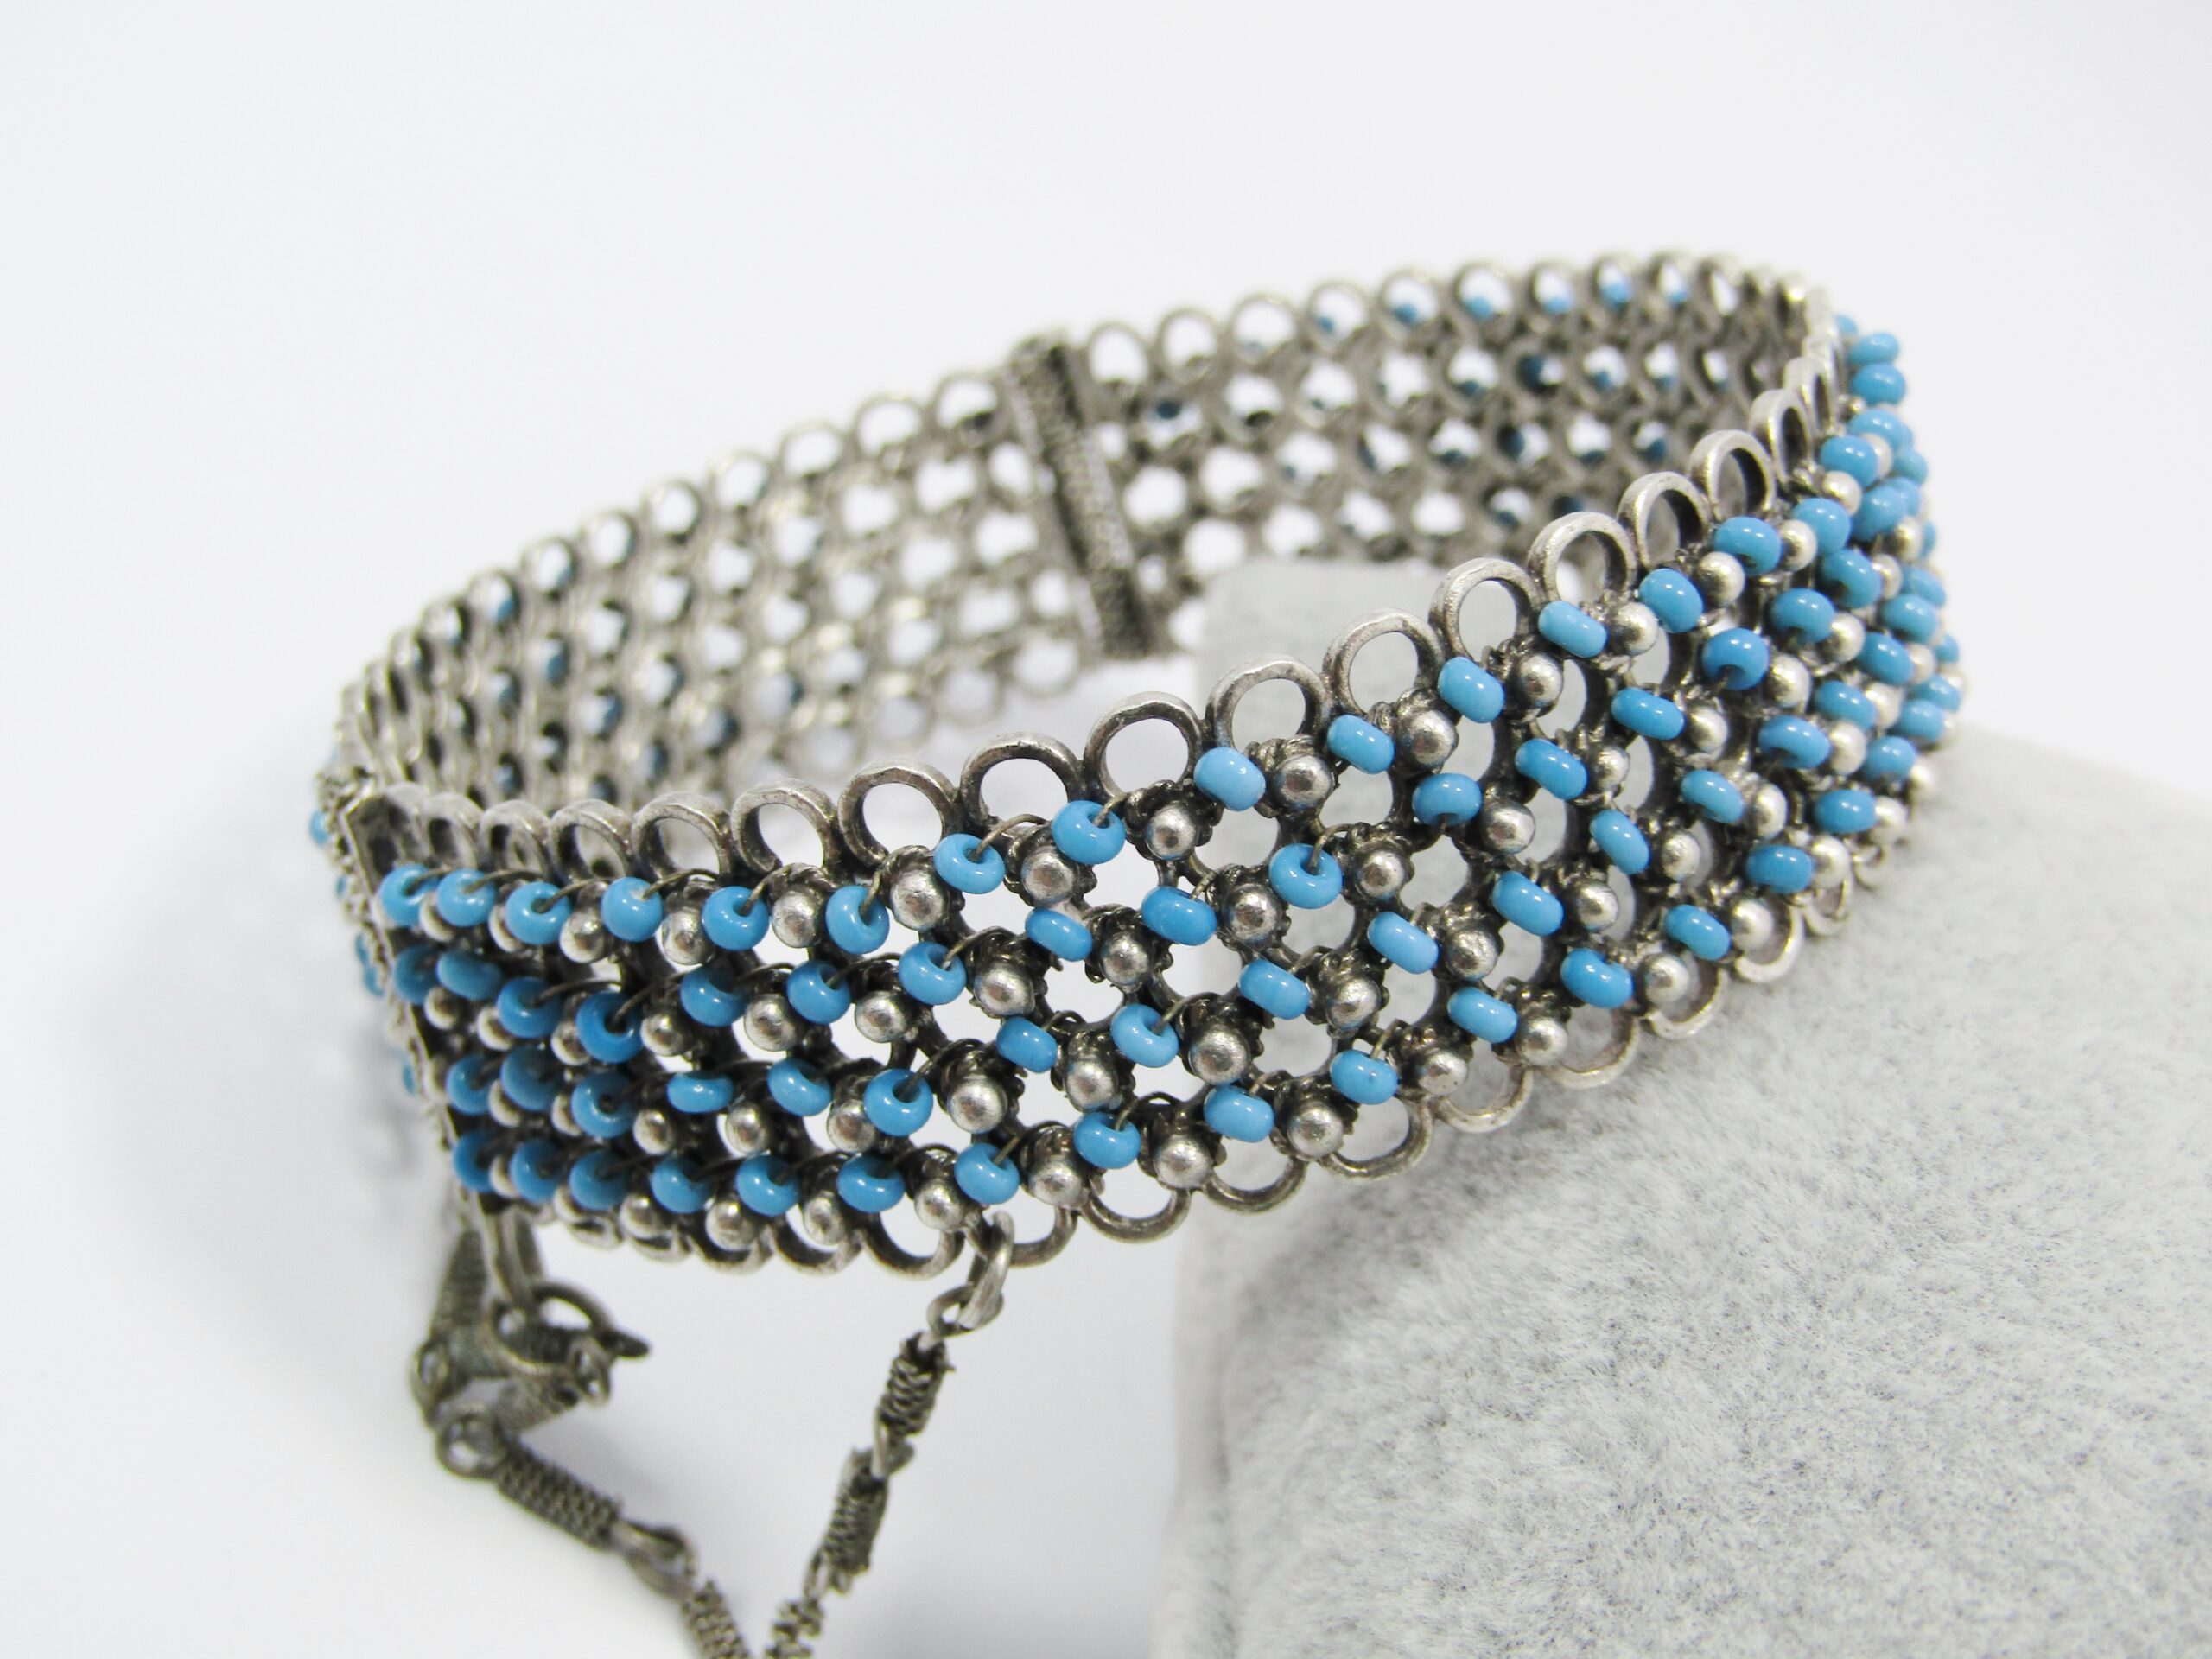 Beautiful Vintage Beaded Reticulated Silver Bangle